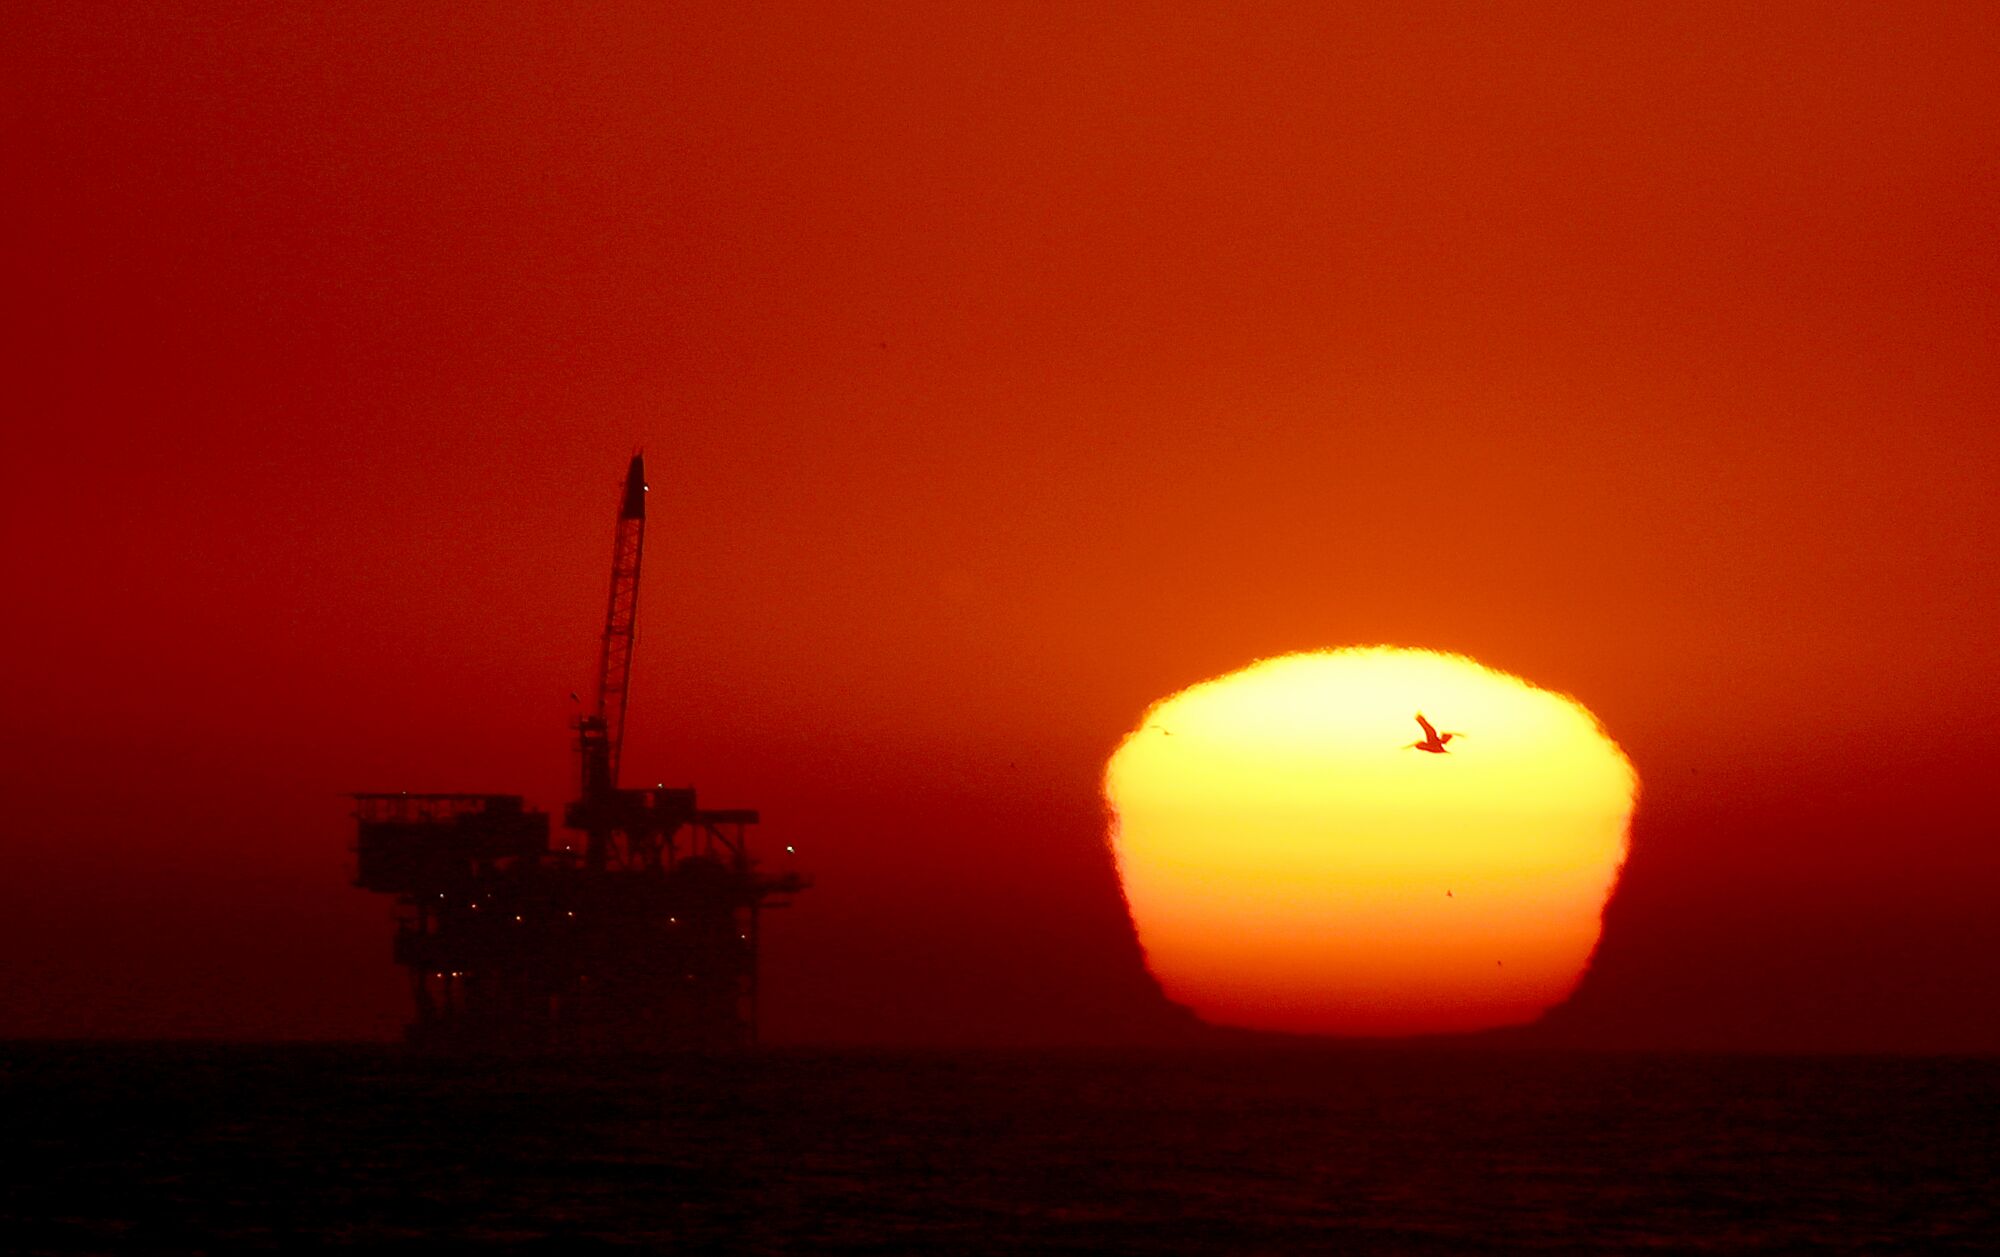 The sun sets behind an oil drilling platform off the coast of Huntington Beach on Monday.